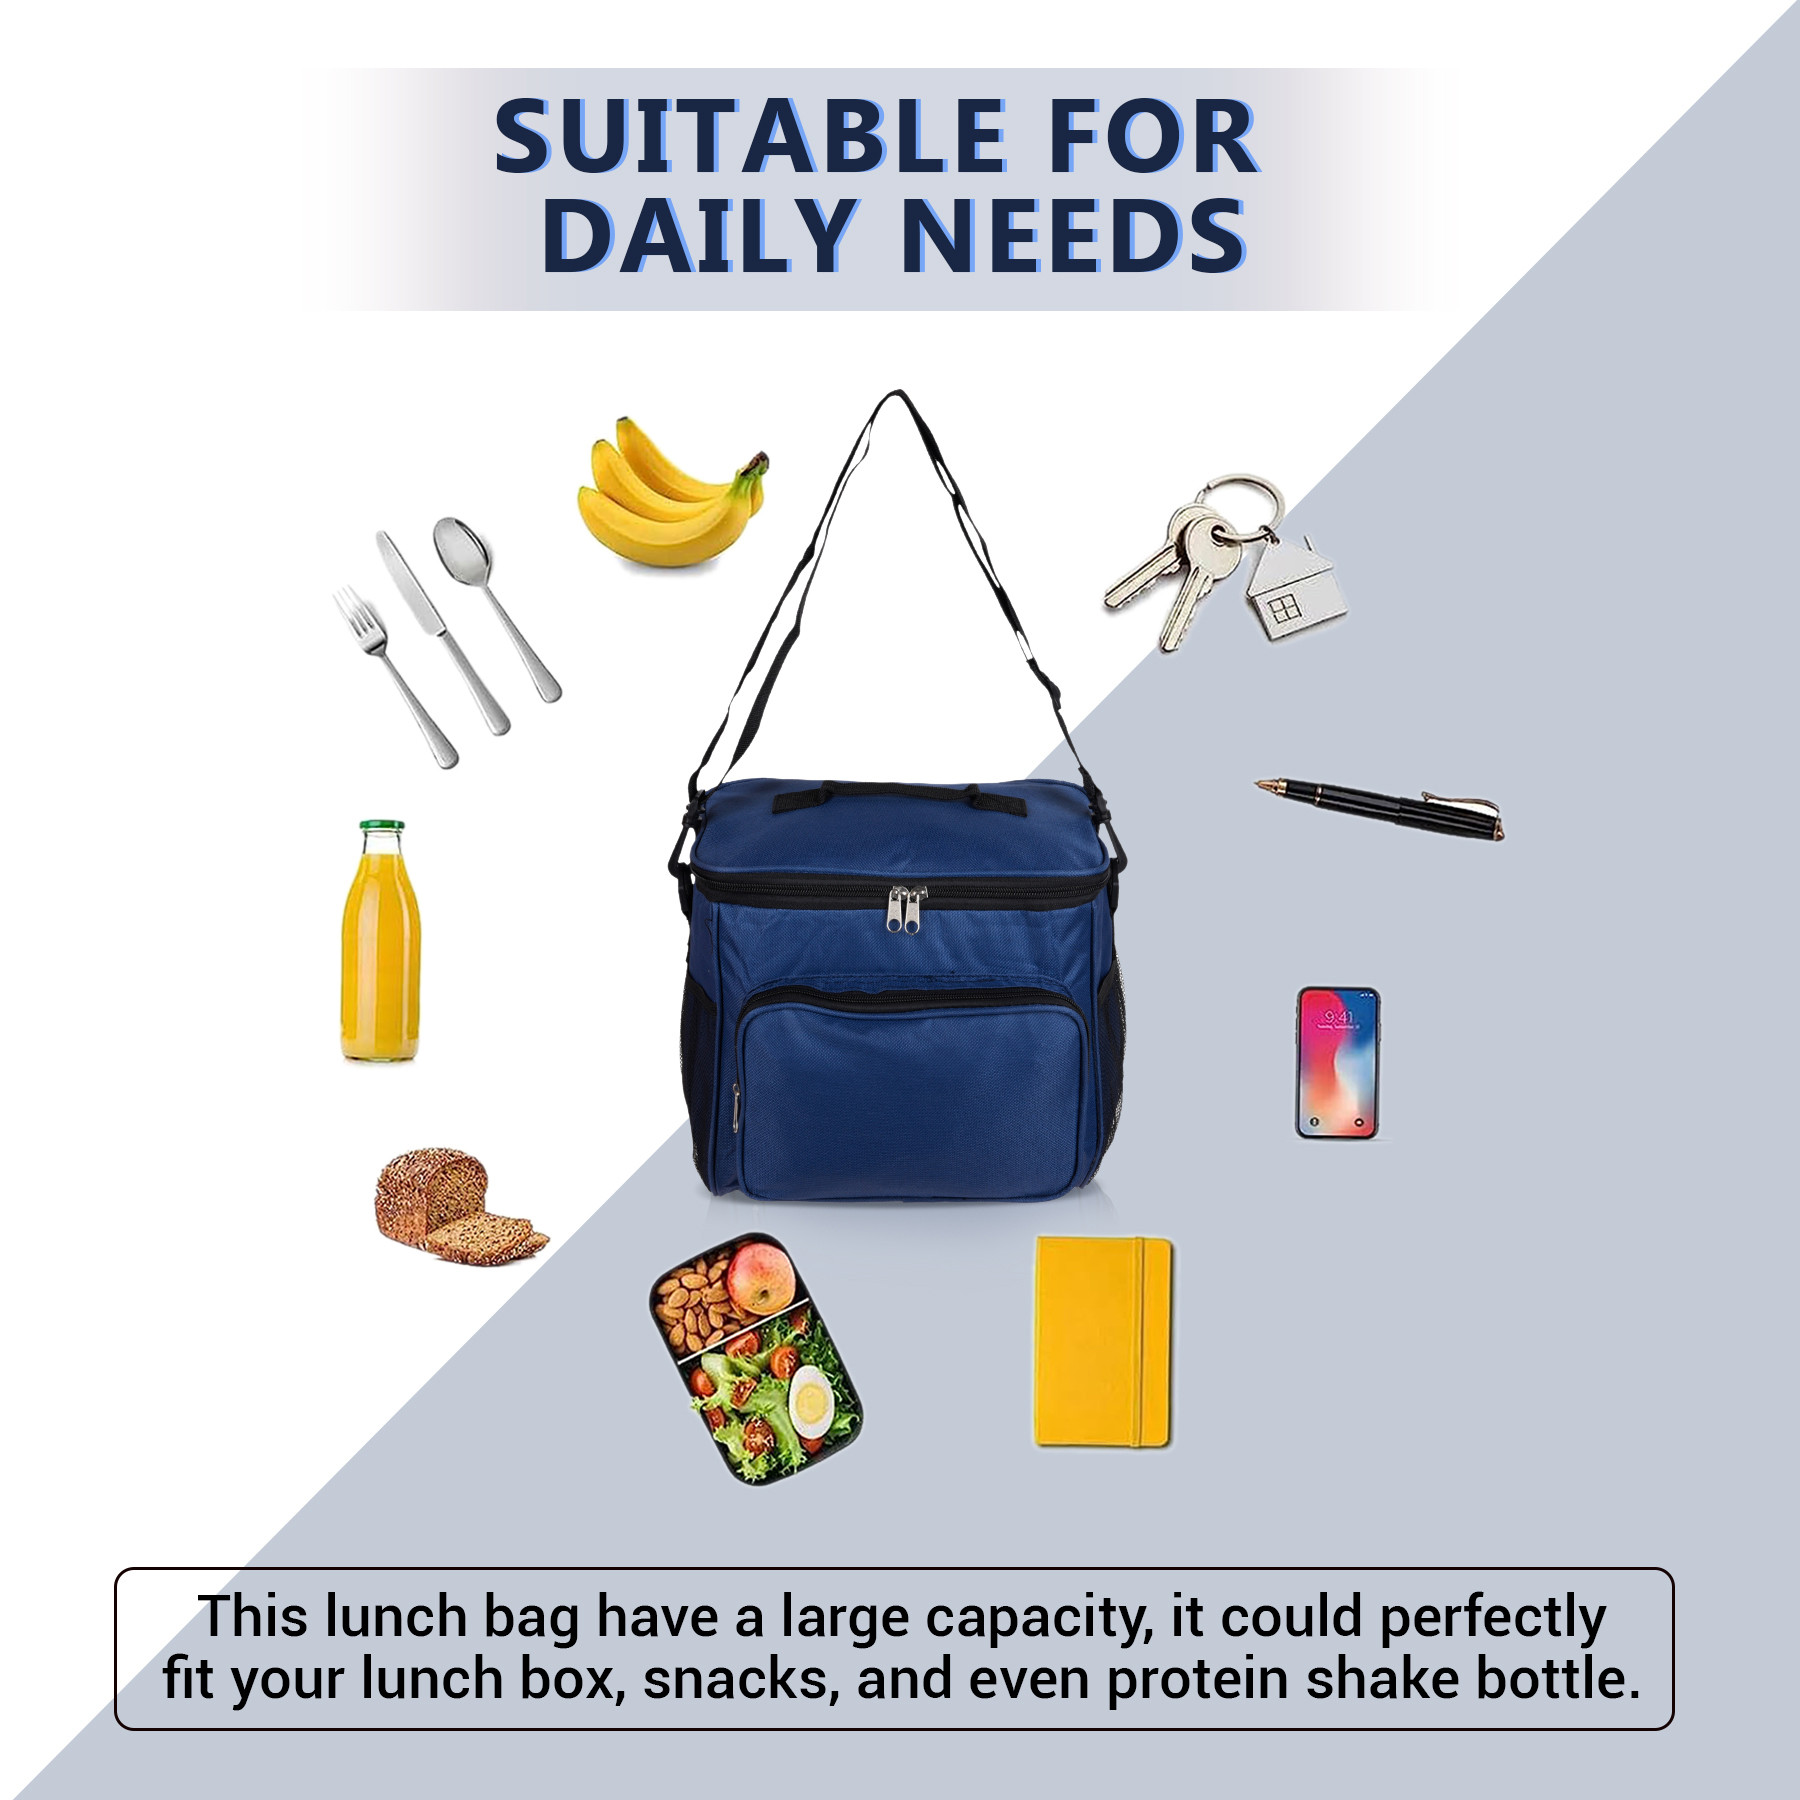 Kuber Industries Lunch Bag | Rexine Thermal Insulated Lunch Bag | Tiffin Bag with Bottle Holder | Waterproof Top Handle Lunch Bag | Front Pocket Lunch Bag for Office | Blue